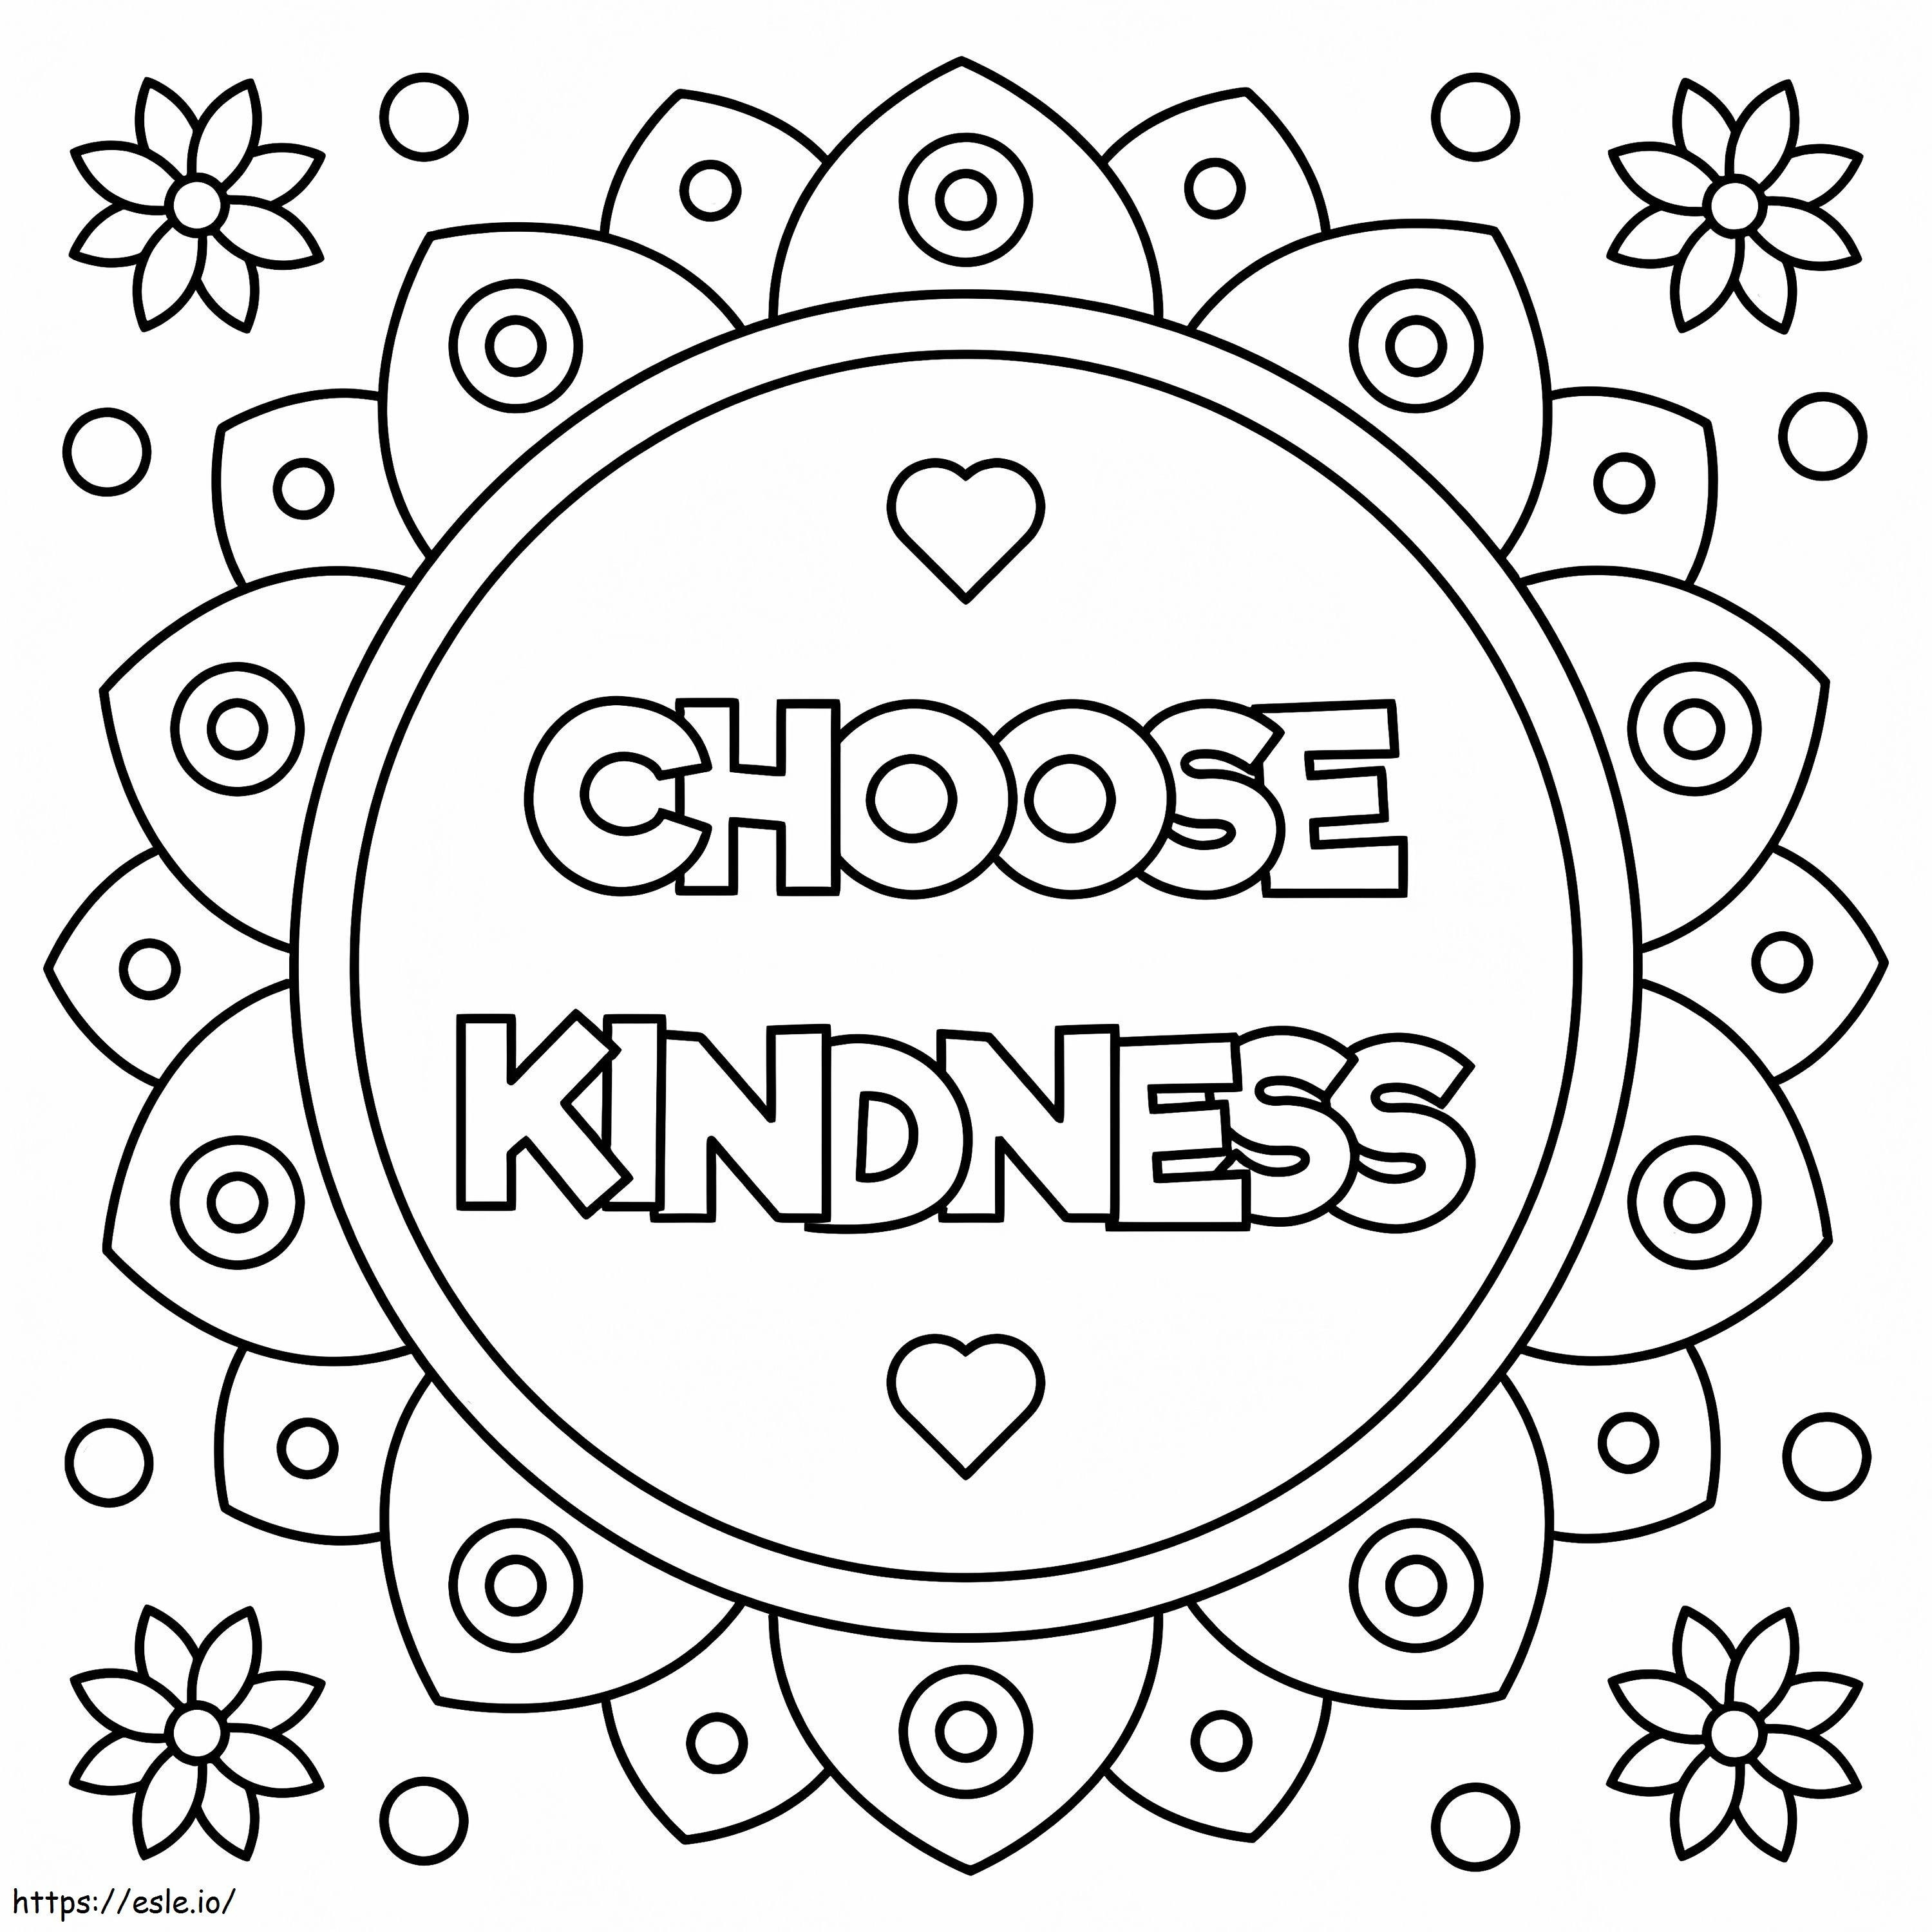 Choose Kindness coloring page